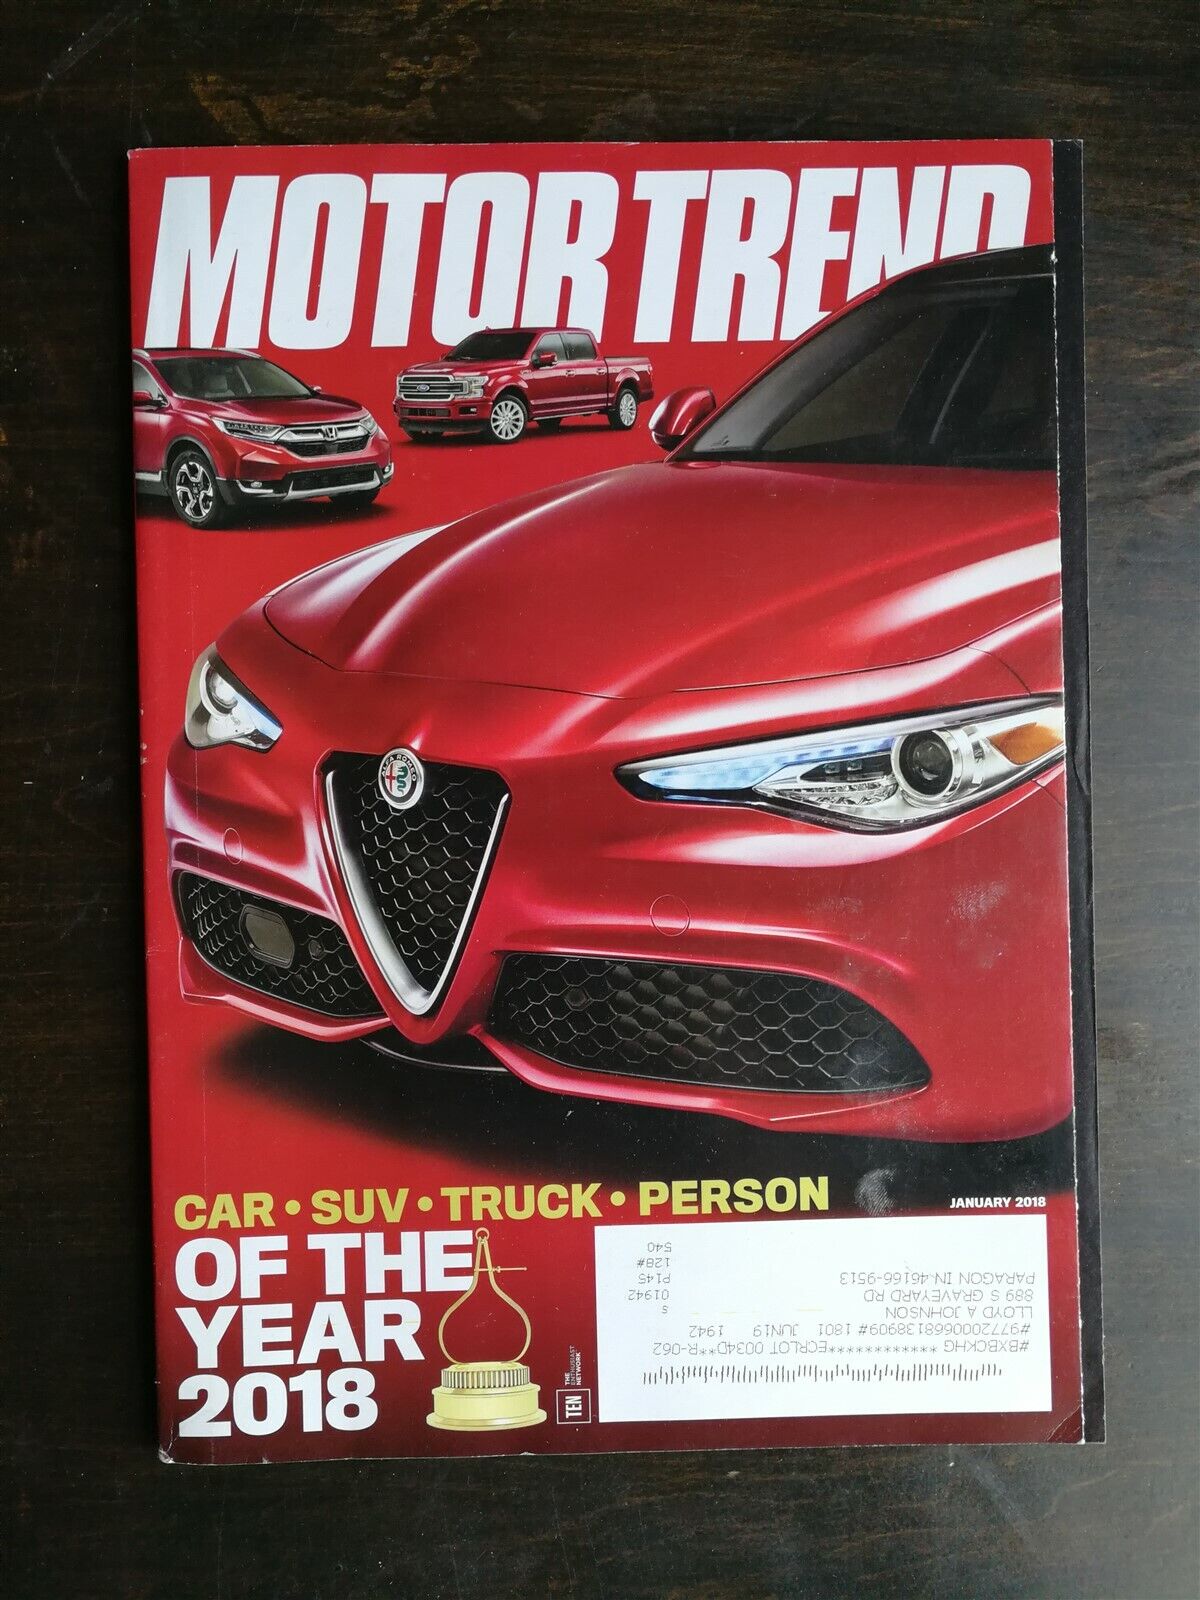 Motor Trend Magazine January 2018 - Awards Issue Truck SUV Car of the Year